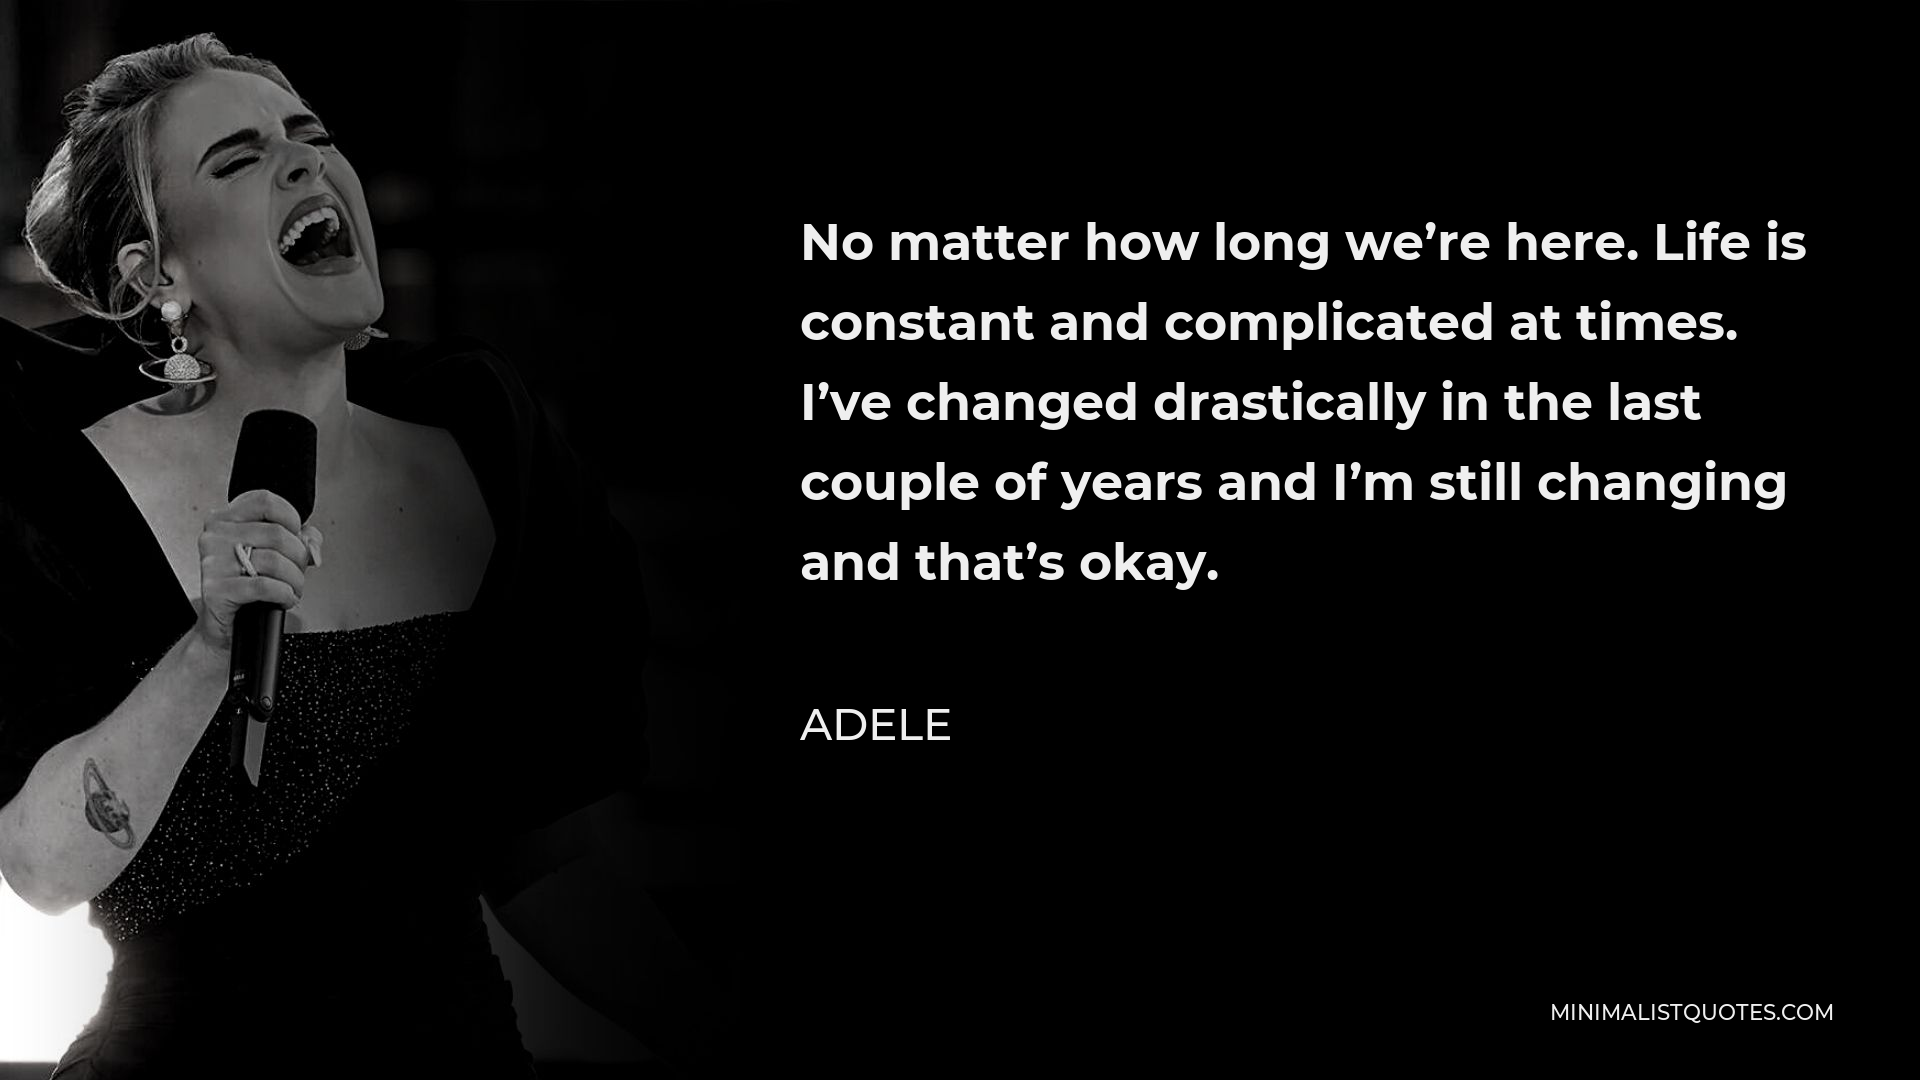 Adele Quote - No matter how long we’re here. Life is constant and complicated at times. I’ve changed drastically in the last couple of years and I’m still changing and that’s okay.